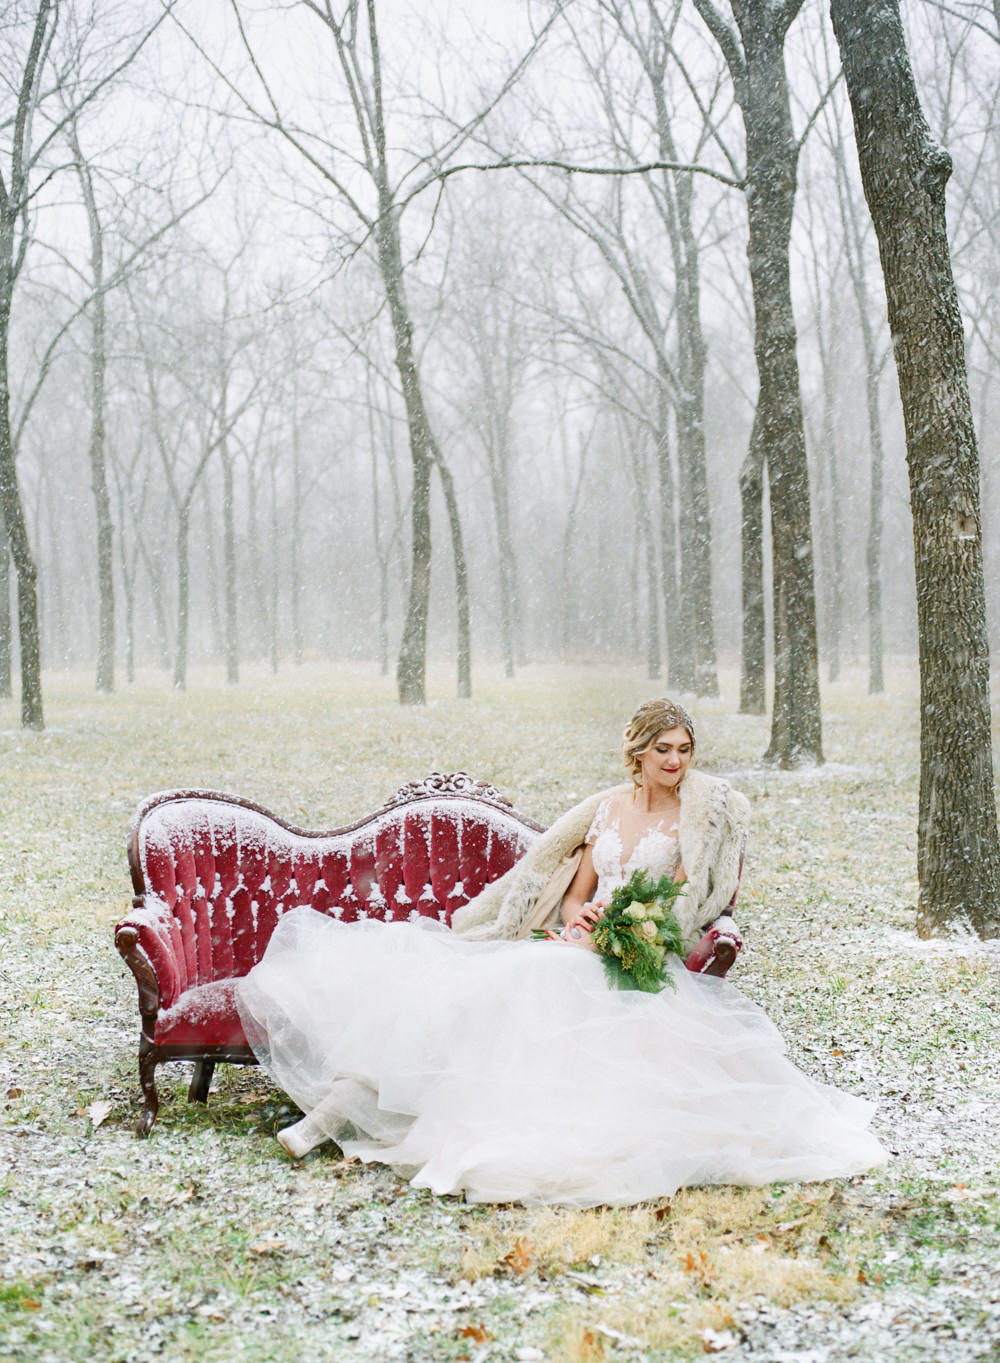 Winter wedding, bride with fur coat on red couch in snow; St. Louis fine art film wedding photographer Erica Robnett Photography